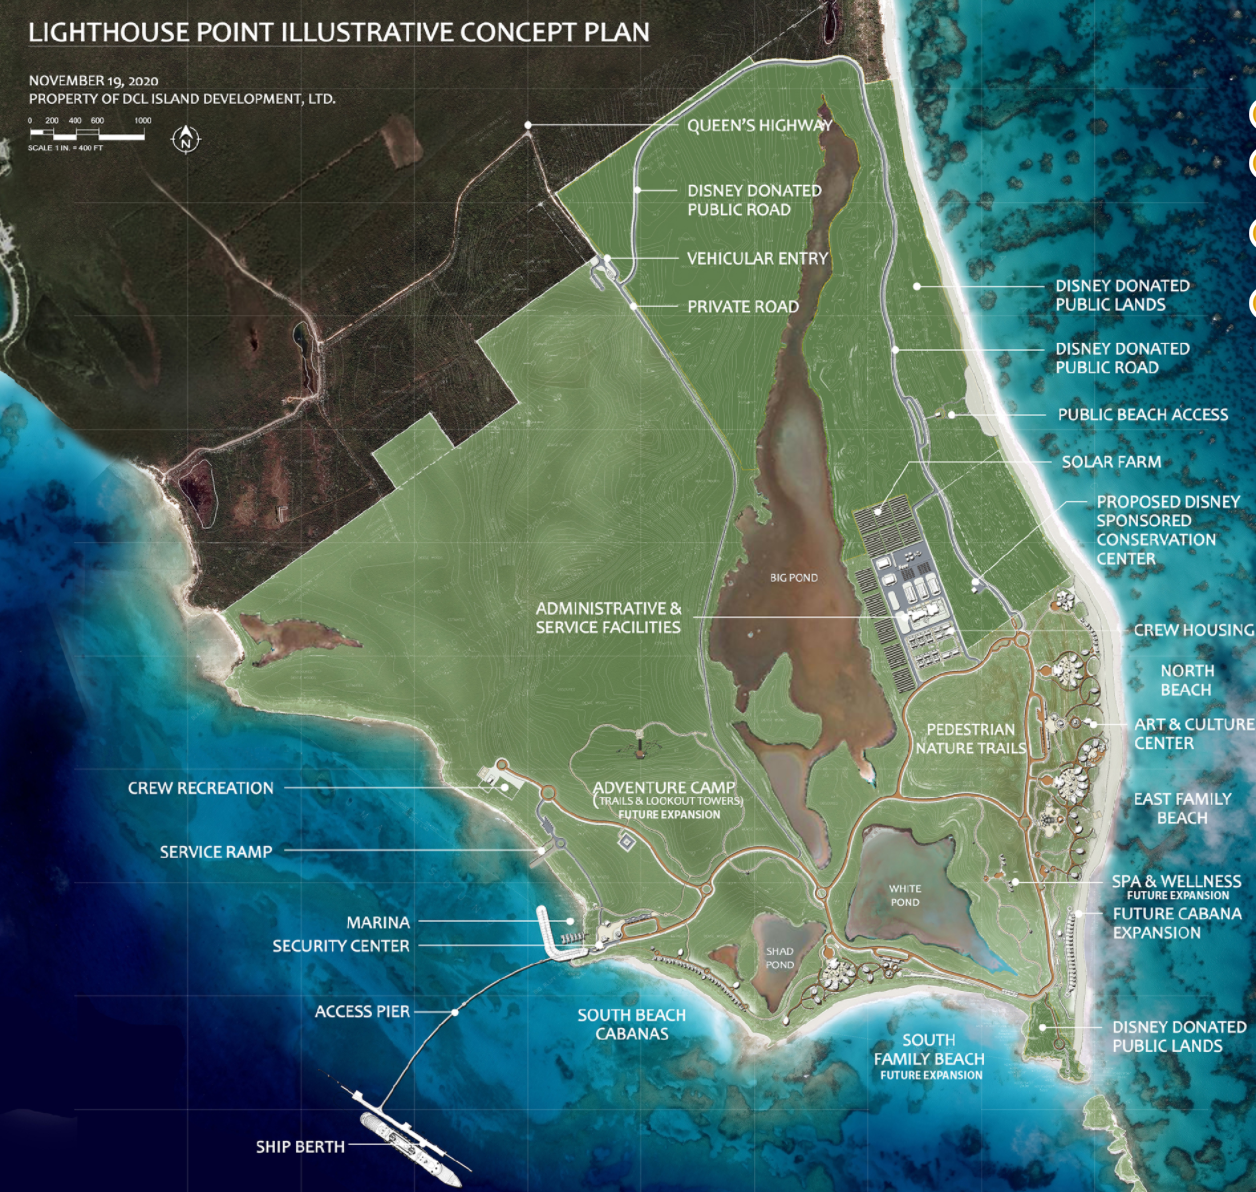 Disney Cruise Line to begin work on Lighthouse Point this year